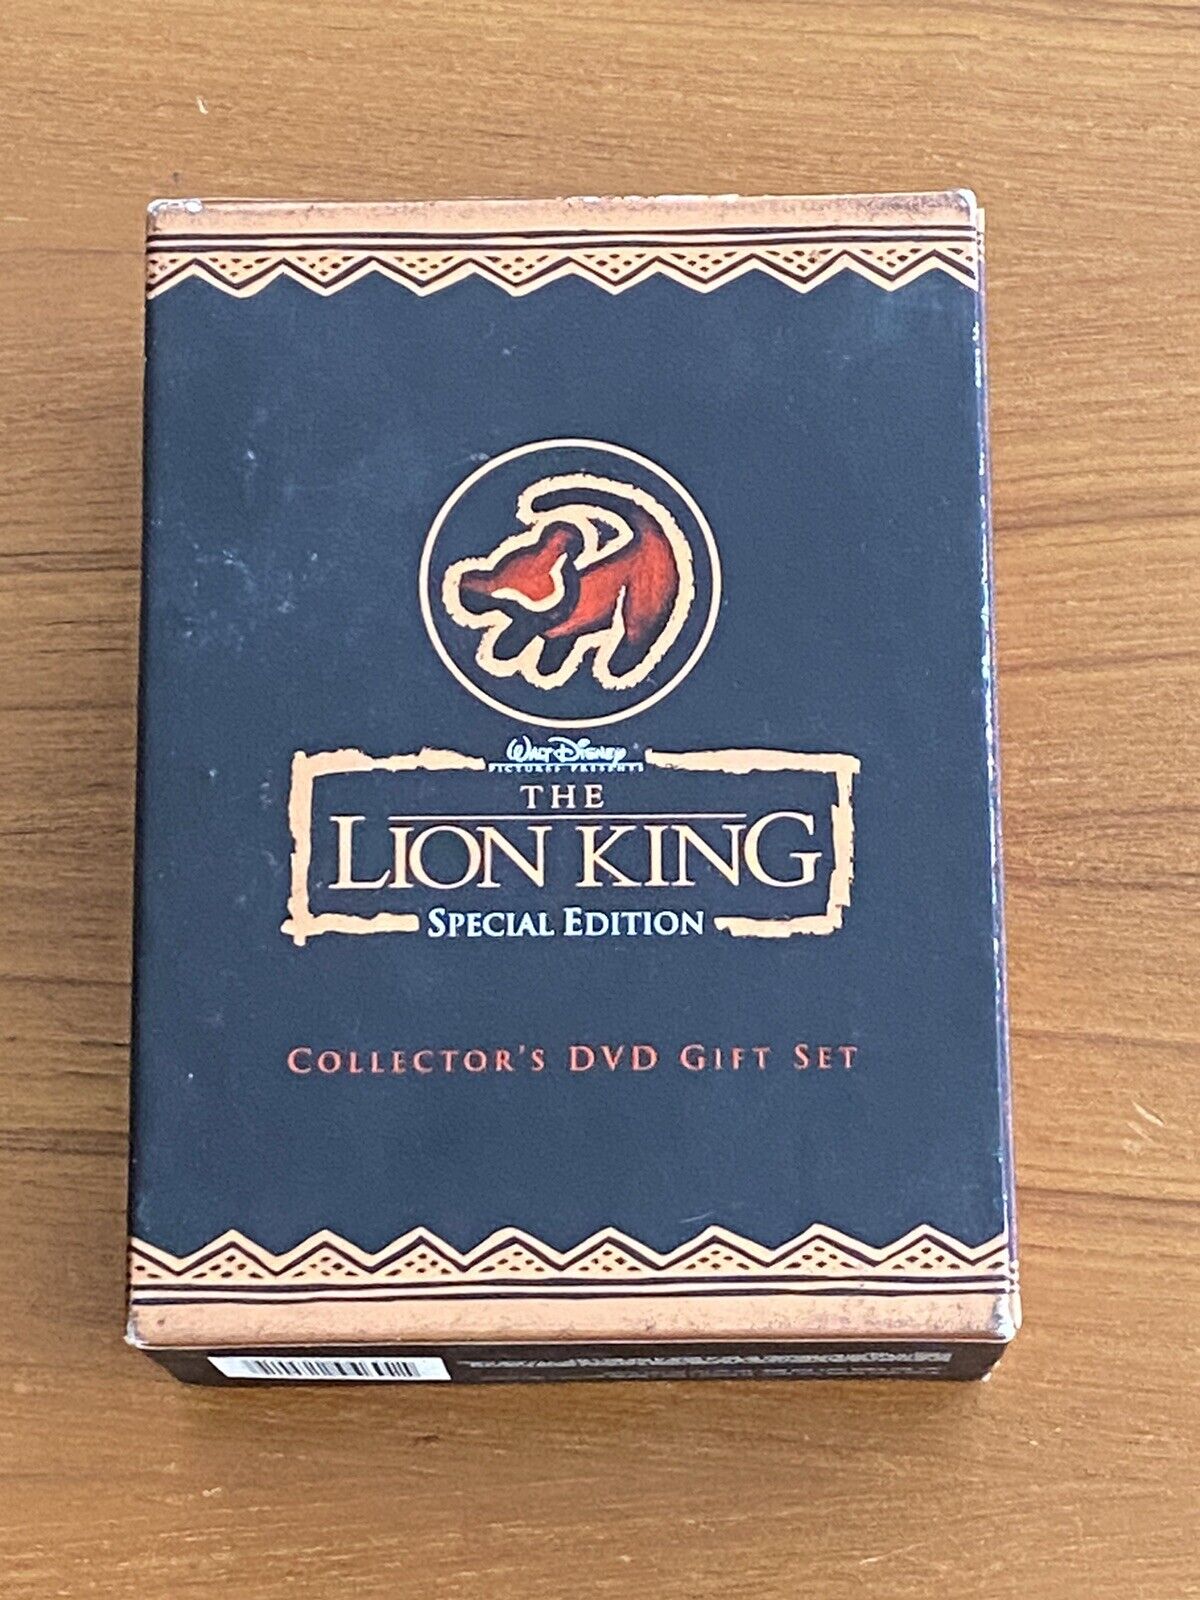 The Lion King Disney Collectors DVD Gift Set XLNT DVD, Book, Cards